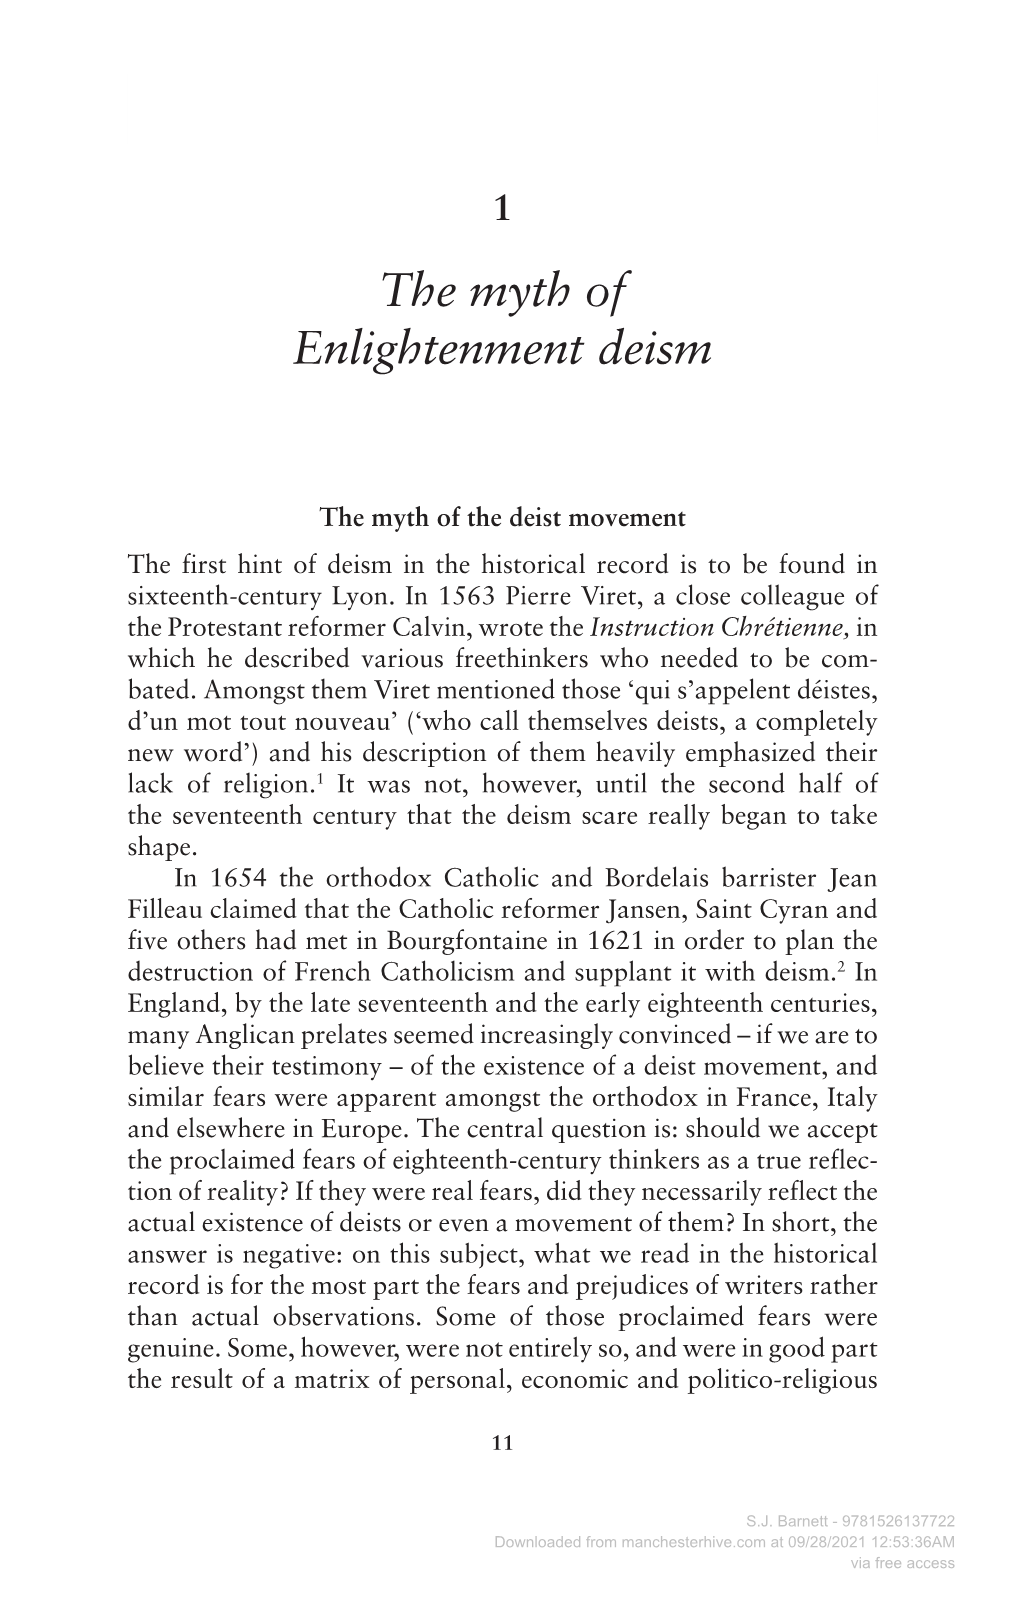 The Myth of Enlightenment Deism